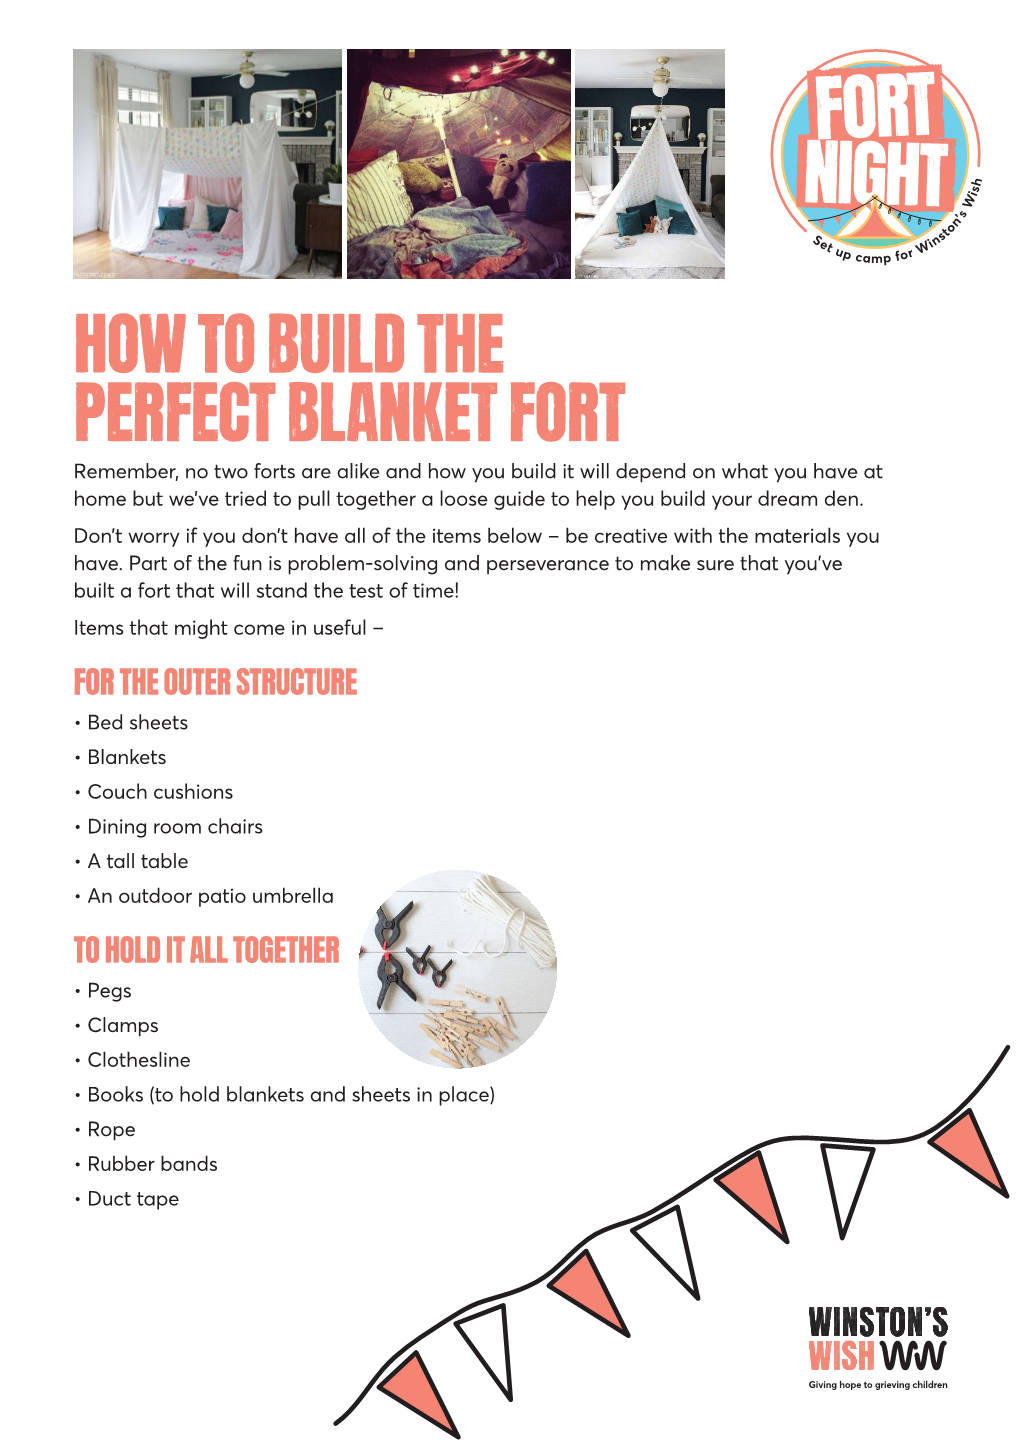 How to Build the Perfect Blanket Fort